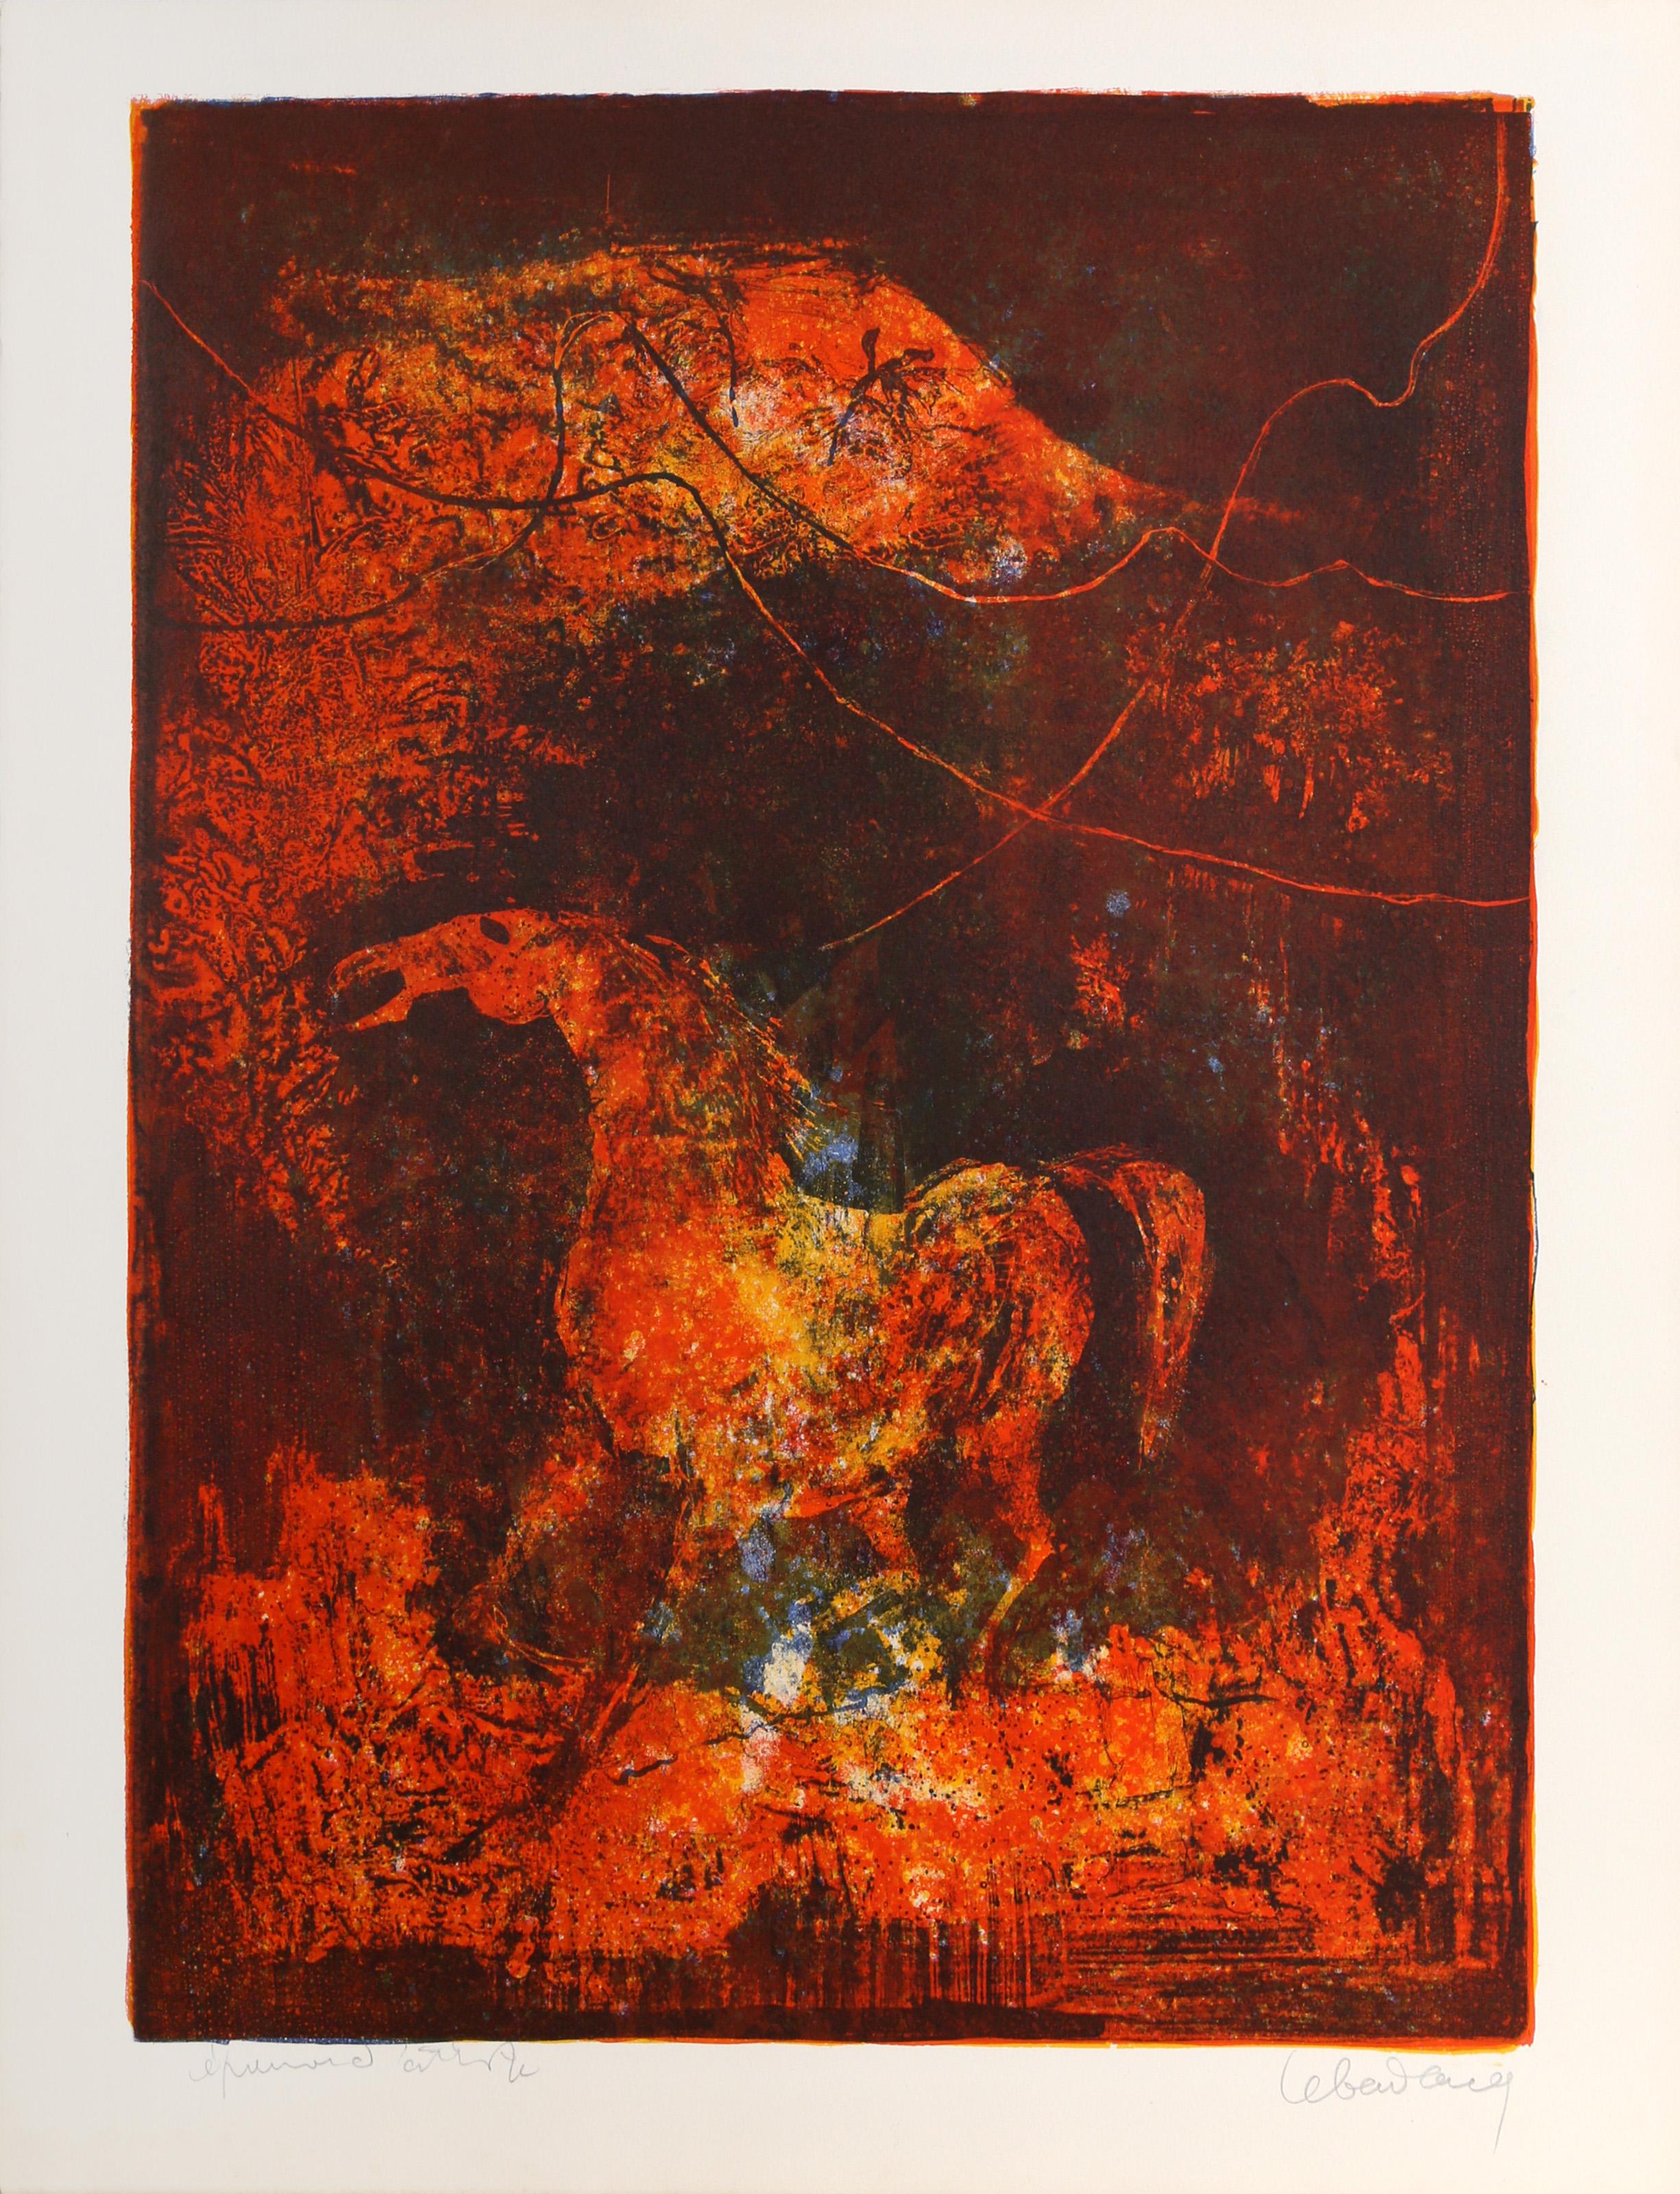 Lebadang (aka Hoi), Vietnamese (1922 - 2015) -  Burning Stallion. Medium: Lithograph, signed and numbered in pencil, Edition: E.A., Image Size: 22.75 x 16 inches, Size: 25.5 x 19.5 in. (64.77 x 49.53 cm), Description: Lebadang was a Vietnam-born